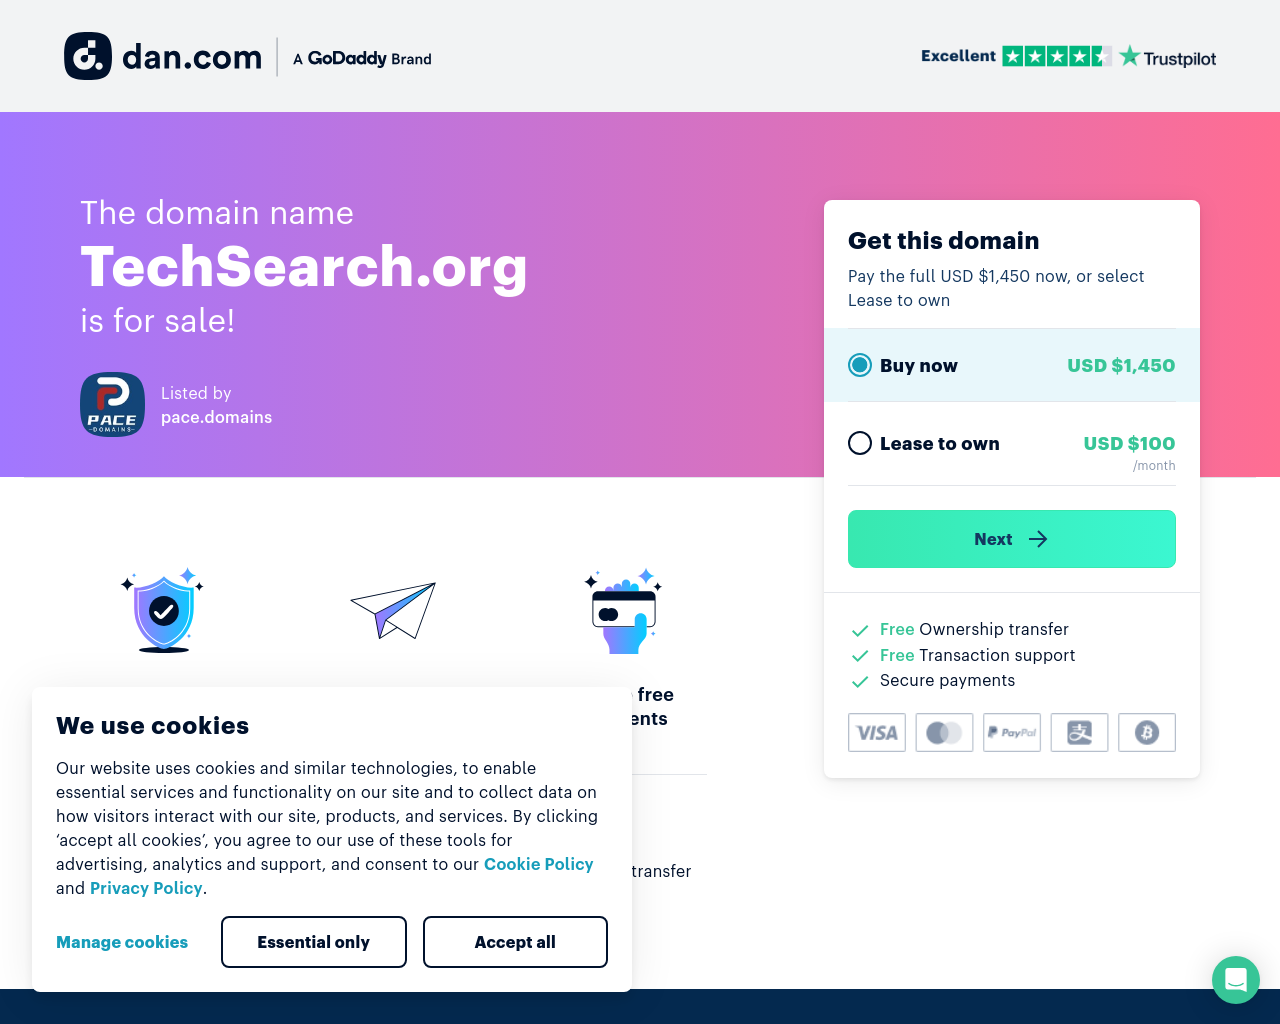 Techsearch